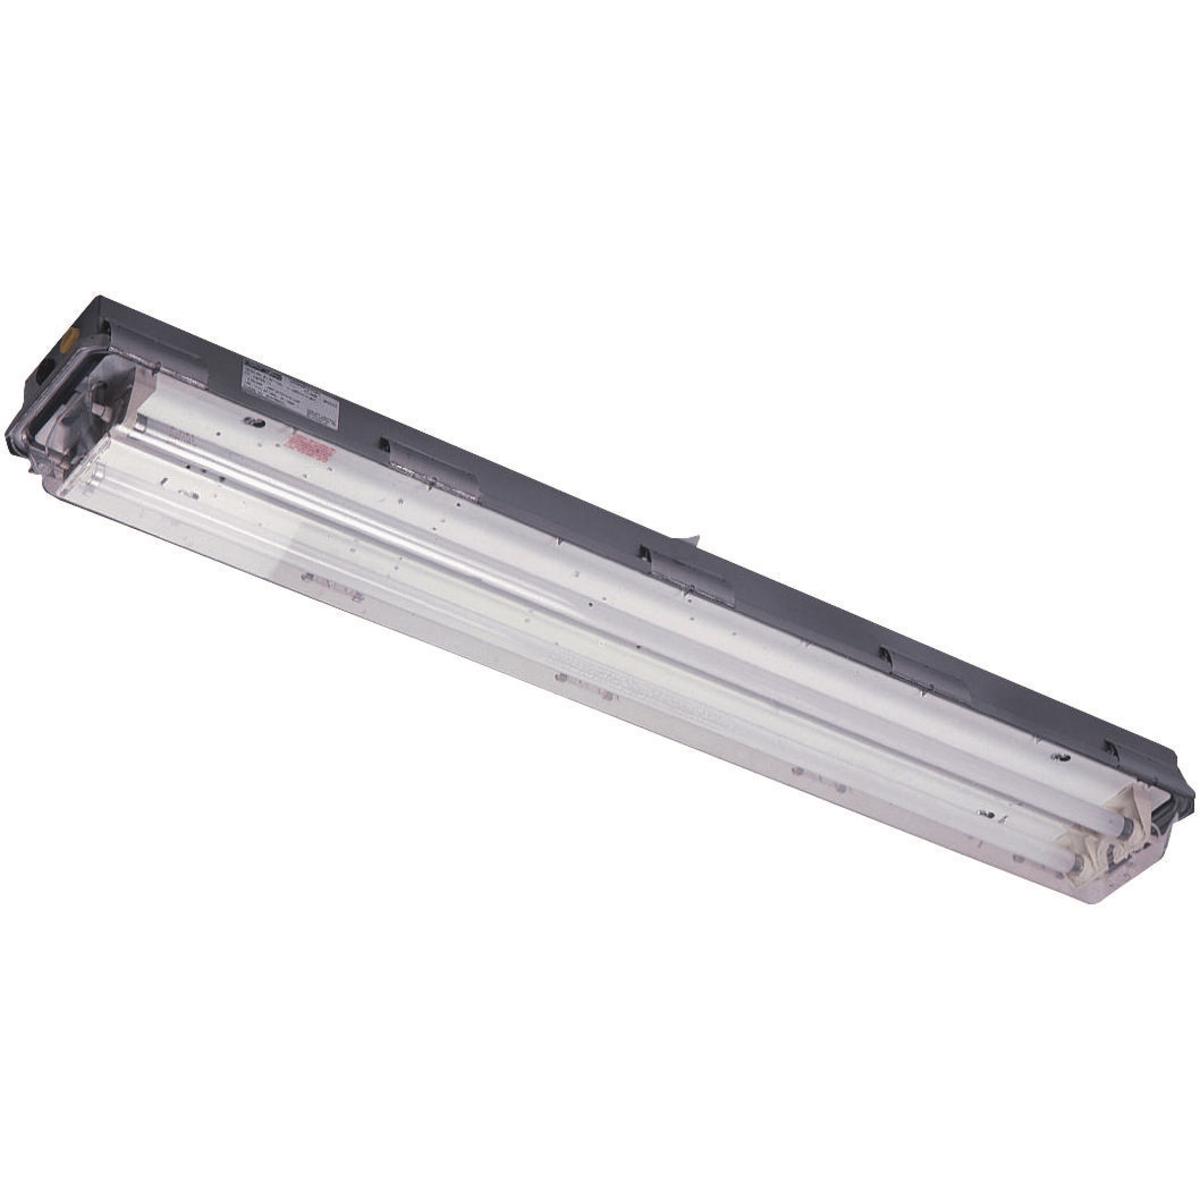 Hubbell LZ2S40230 LZ2S Series- Stainless Steel - 40W 120-277V - 2' 2-Lamp Biaxial Electronic 50/60 Hz, 0°F Start 4-Pin  ; NEMA 4X & IP66 rated stainless enclosure with Lexan® impact resistant polycarbonate lens. ; Two 3/4” NPT stainless hubs - one at each end (includes alu